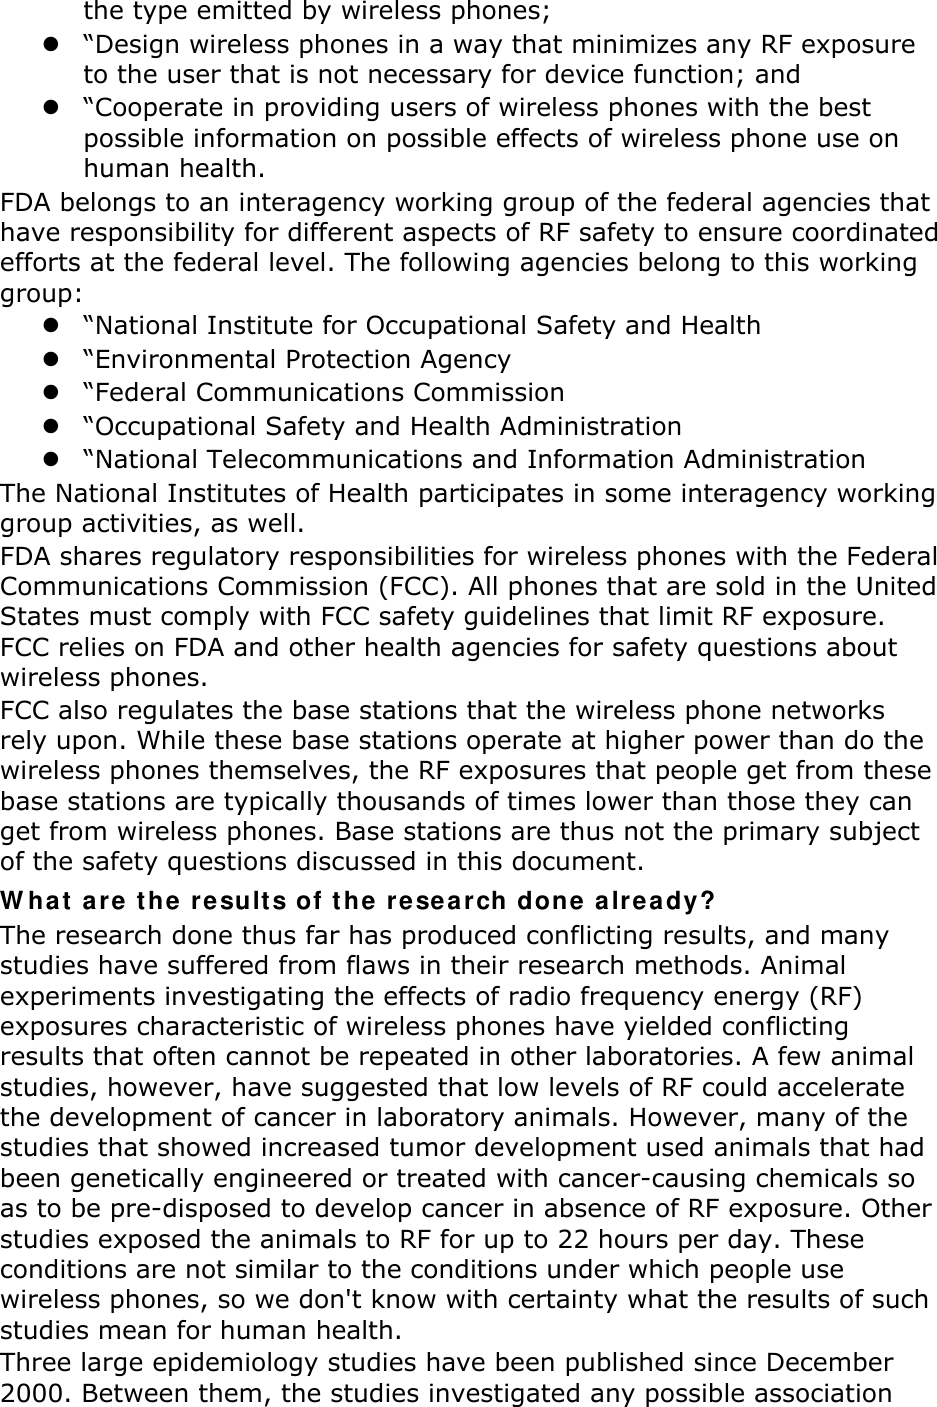 the type emitted by wireless phones;  “Design wireless phones in a way that minimizes any RF exposure to the user that is not necessary for device function; and  “Cooperate in providing users of wireless phones with the best possible information on possible effects of wireless phone use on human health. FDA belongs to an interagency working group of the federal agencies that have responsibility for different aspects of RF safety to ensure coordinated efforts at the federal level. The following agencies belong to this working group:  “National Institute for Occupational Safety and Health  “Environmental Protection Agency  “Federal Communications Commission  “Occupational Safety and Health Administration  “National Telecommunications and Information Administration The National Institutes of Health participates in some interagency working group activities, as well. FDA shares regulatory responsibilities for wireless phones with the Federal Communications Commission (FCC). All phones that are sold in the United States must comply with FCC safety guidelines that limit RF exposure. FCC relies on FDA and other health agencies for safety questions about wireless phones. FCC also regulates the base stations that the wireless phone networks rely upon. While these base stations operate at higher power than do the wireless phones themselves, the RF exposures that people get from these base stations are typically thousands of times lower than those they can get from wireless phones. Base stations are thus not the primary subject of the safety questions discussed in this document. W hat  ar e t he  results of t he  r esea rch done a lr ea dy? The research done thus far has produced conflicting results, and many studies have suffered from flaws in their research methods. Animal experiments investigating the effects of radio frequency energy (RF) exposures characteristic of wireless phones have yielded conflicting results that often cannot be repeated in other laboratories. A few animal studies, however, have suggested that low levels of RF could accelerate the development of cancer in laboratory animals. However, many of the studies that showed increased tumor development used animals that had been genetically engineered or treated with cancer-causing chemicals so as to be pre-disposed to develop cancer in absence of RF exposure. Other studies exposed the animals to RF for up to 22 hours per day. These conditions are not similar to the conditions under which people use wireless phones, so we don&apos;t know with certainty what the results of such studies mean for human health. Three large epidemiology studies have been published since December 2000. Between them, the studies investigated any possible association 